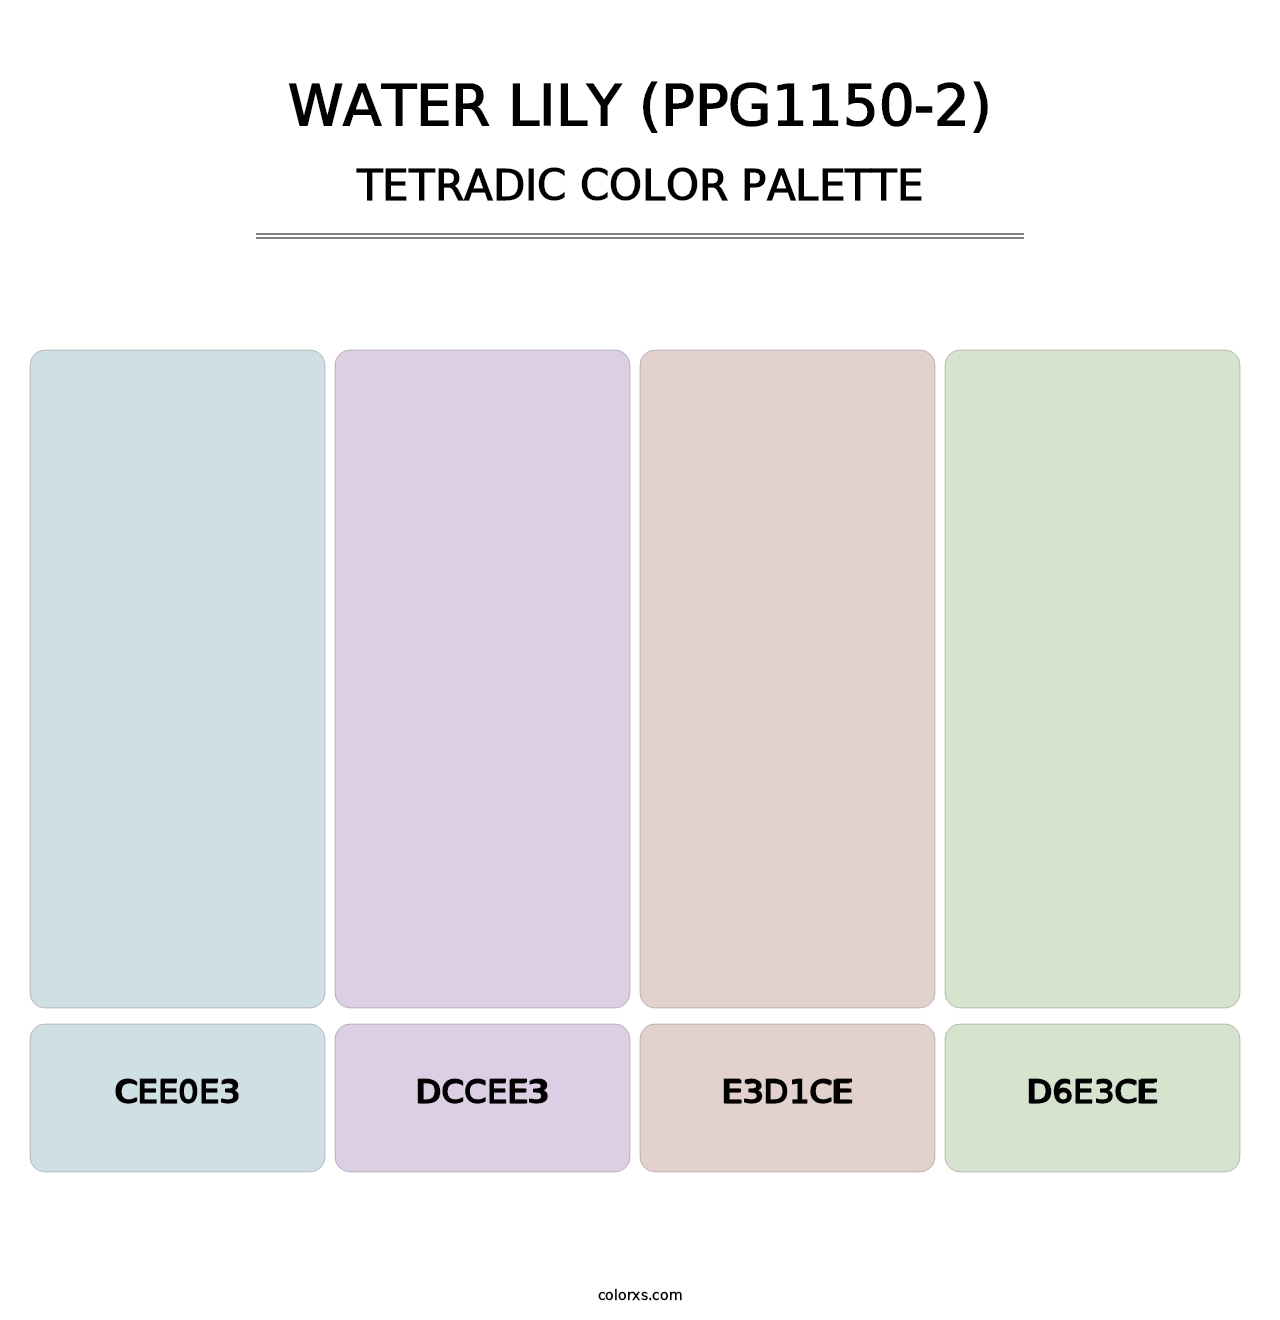 Water Lily (PPG1150-2) - Tetradic Color Palette